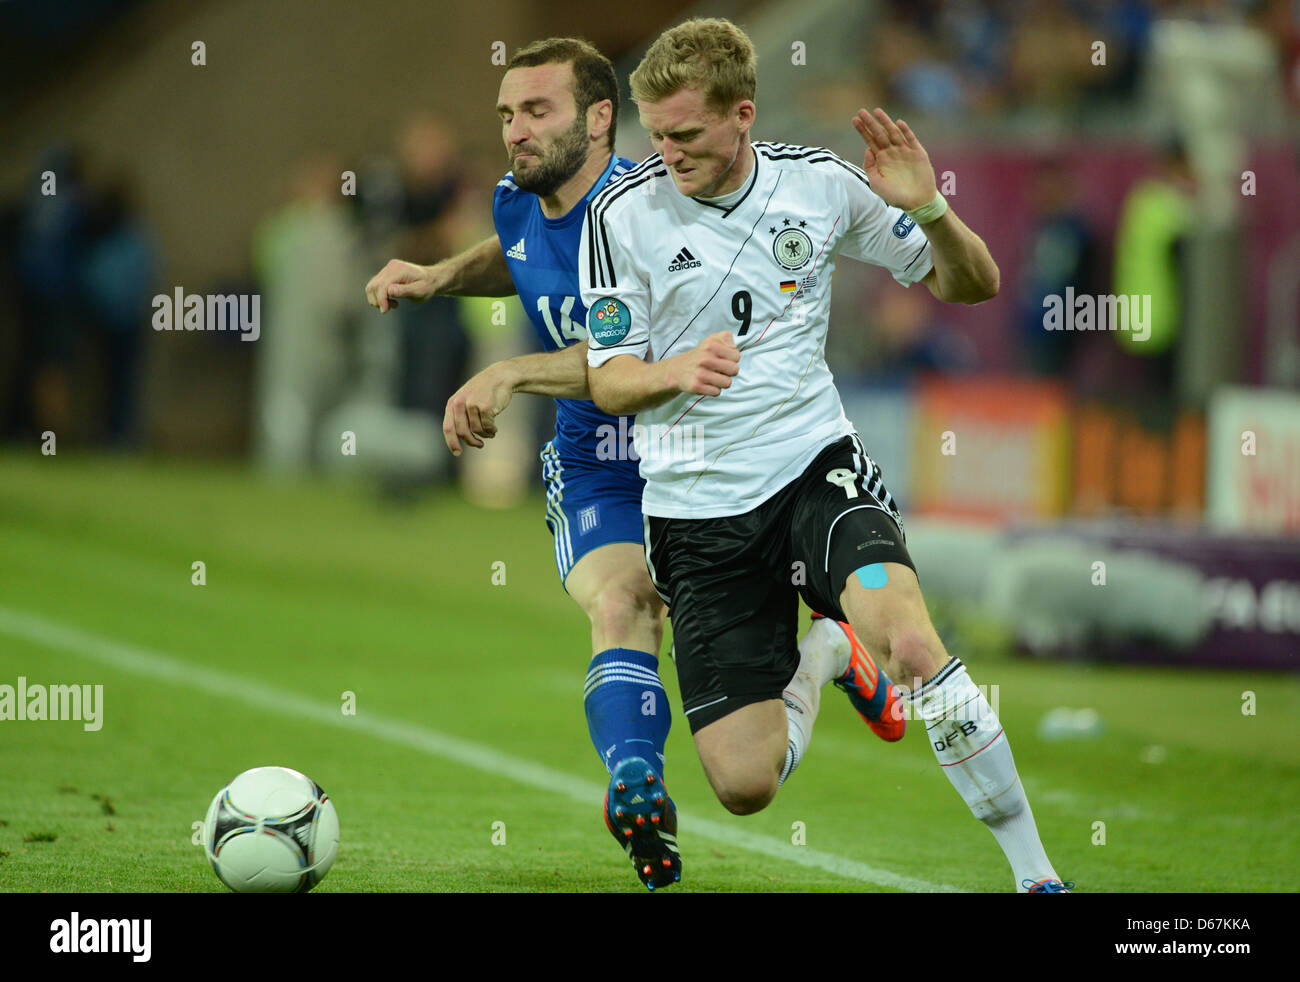 Germany's Andre Schuerrle (R) and Dimitris Salpingidis vie for the ball during the UEFA EURO 2012 quarter-final soccer match Germany vs Greece at Arena Gdansk in Gdansk, Poland, 22 June 2012. Photo: Andreas Gebert dpa (Please refer to chapters 7 and 8 of http://dpaq.de/Ziovh for UEFA Euro 2012 Terms & Conditions) Stock Photo